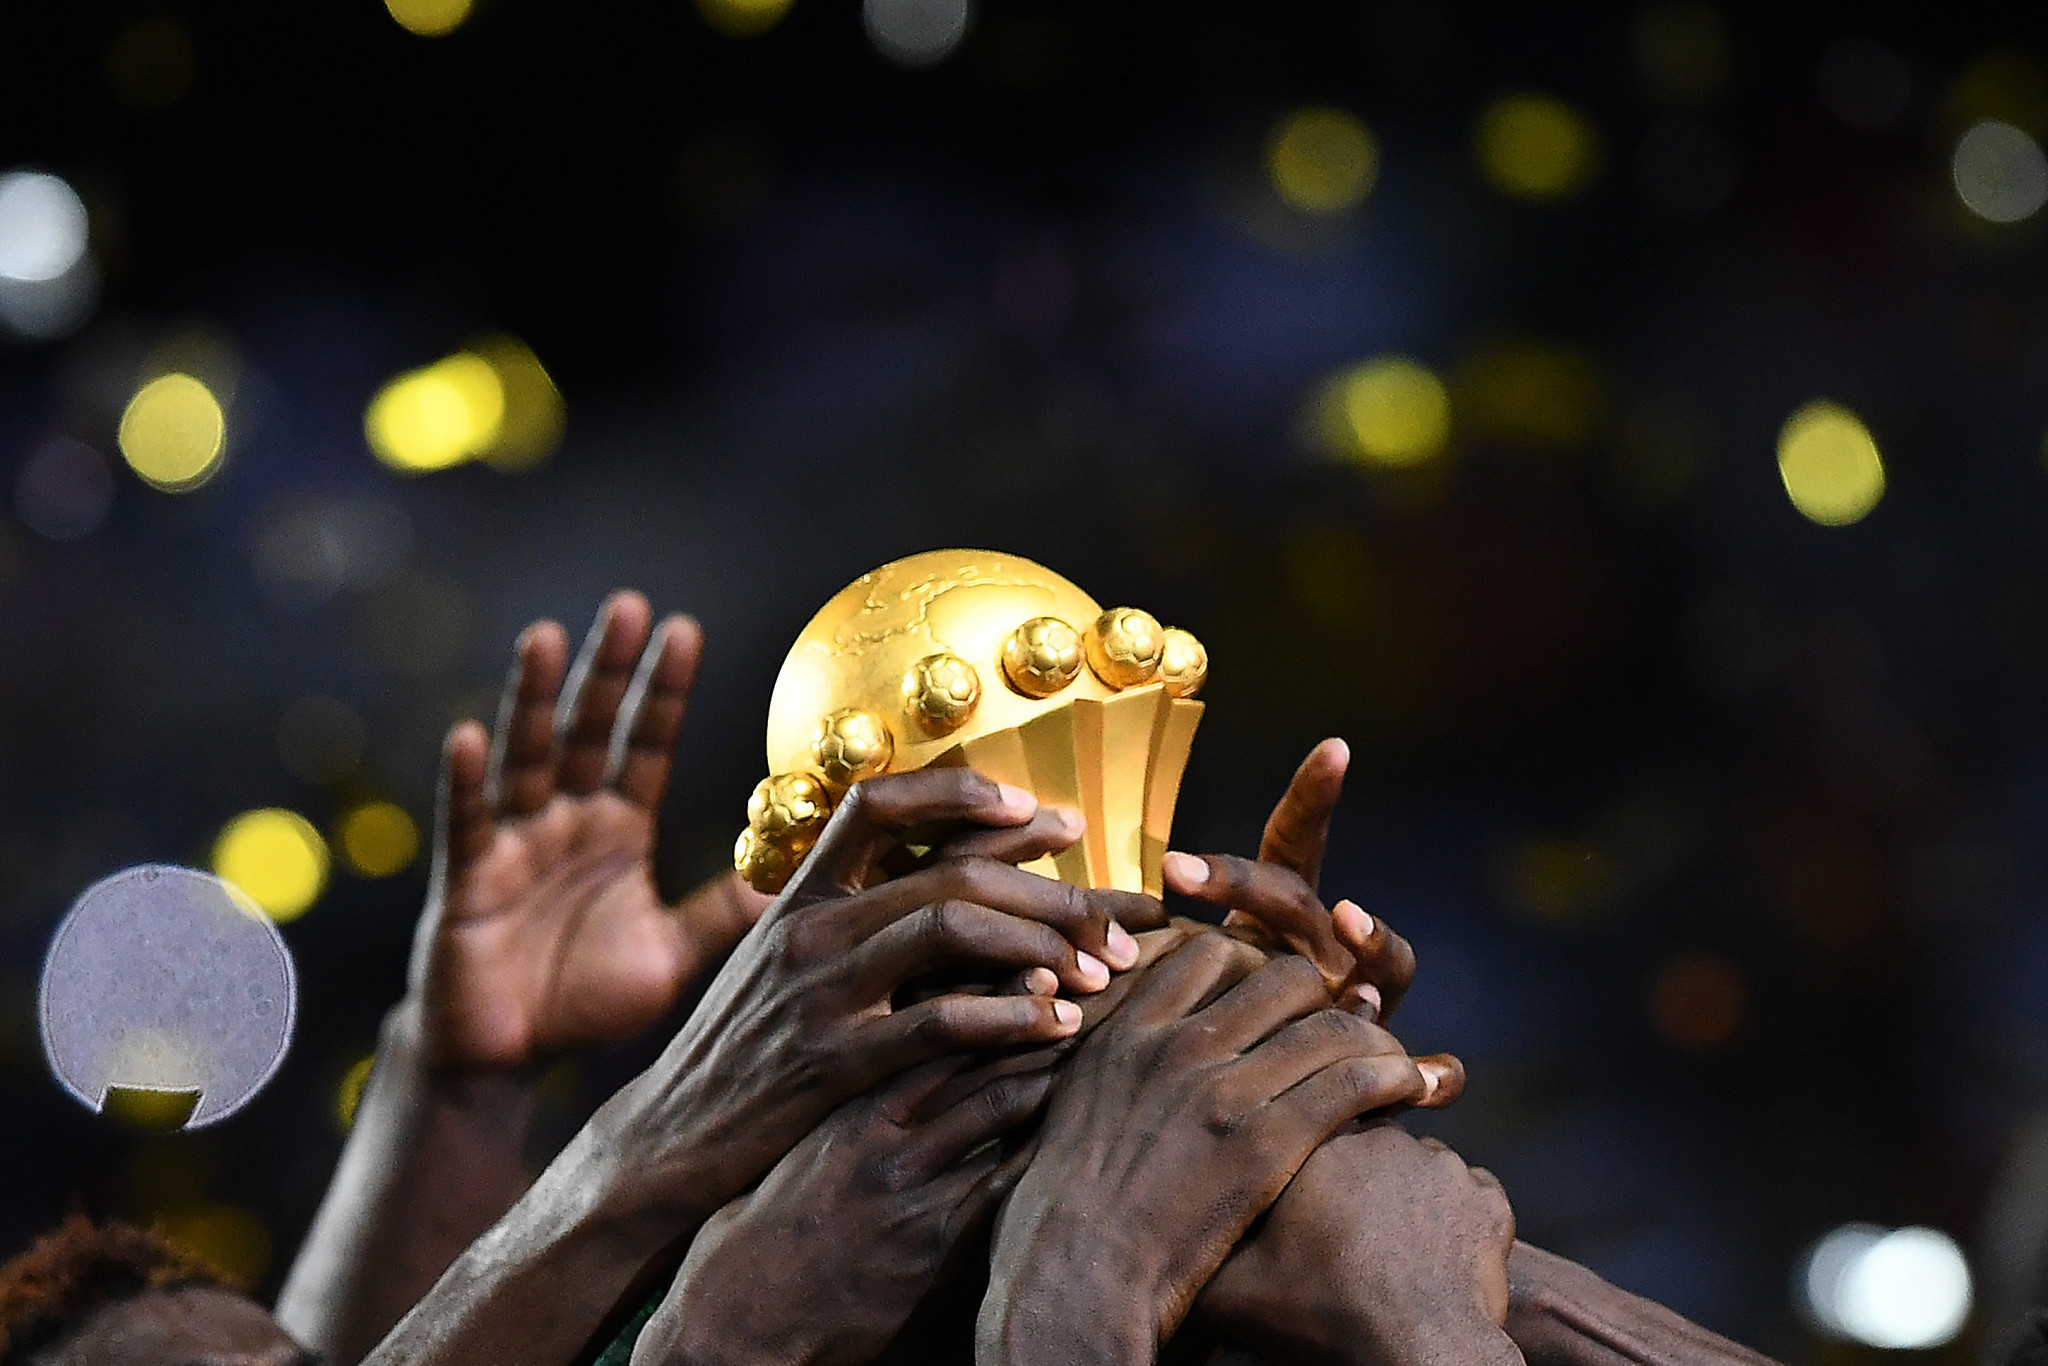 CAF confirms new 2019 Africa Cup of Nations host will be named in January